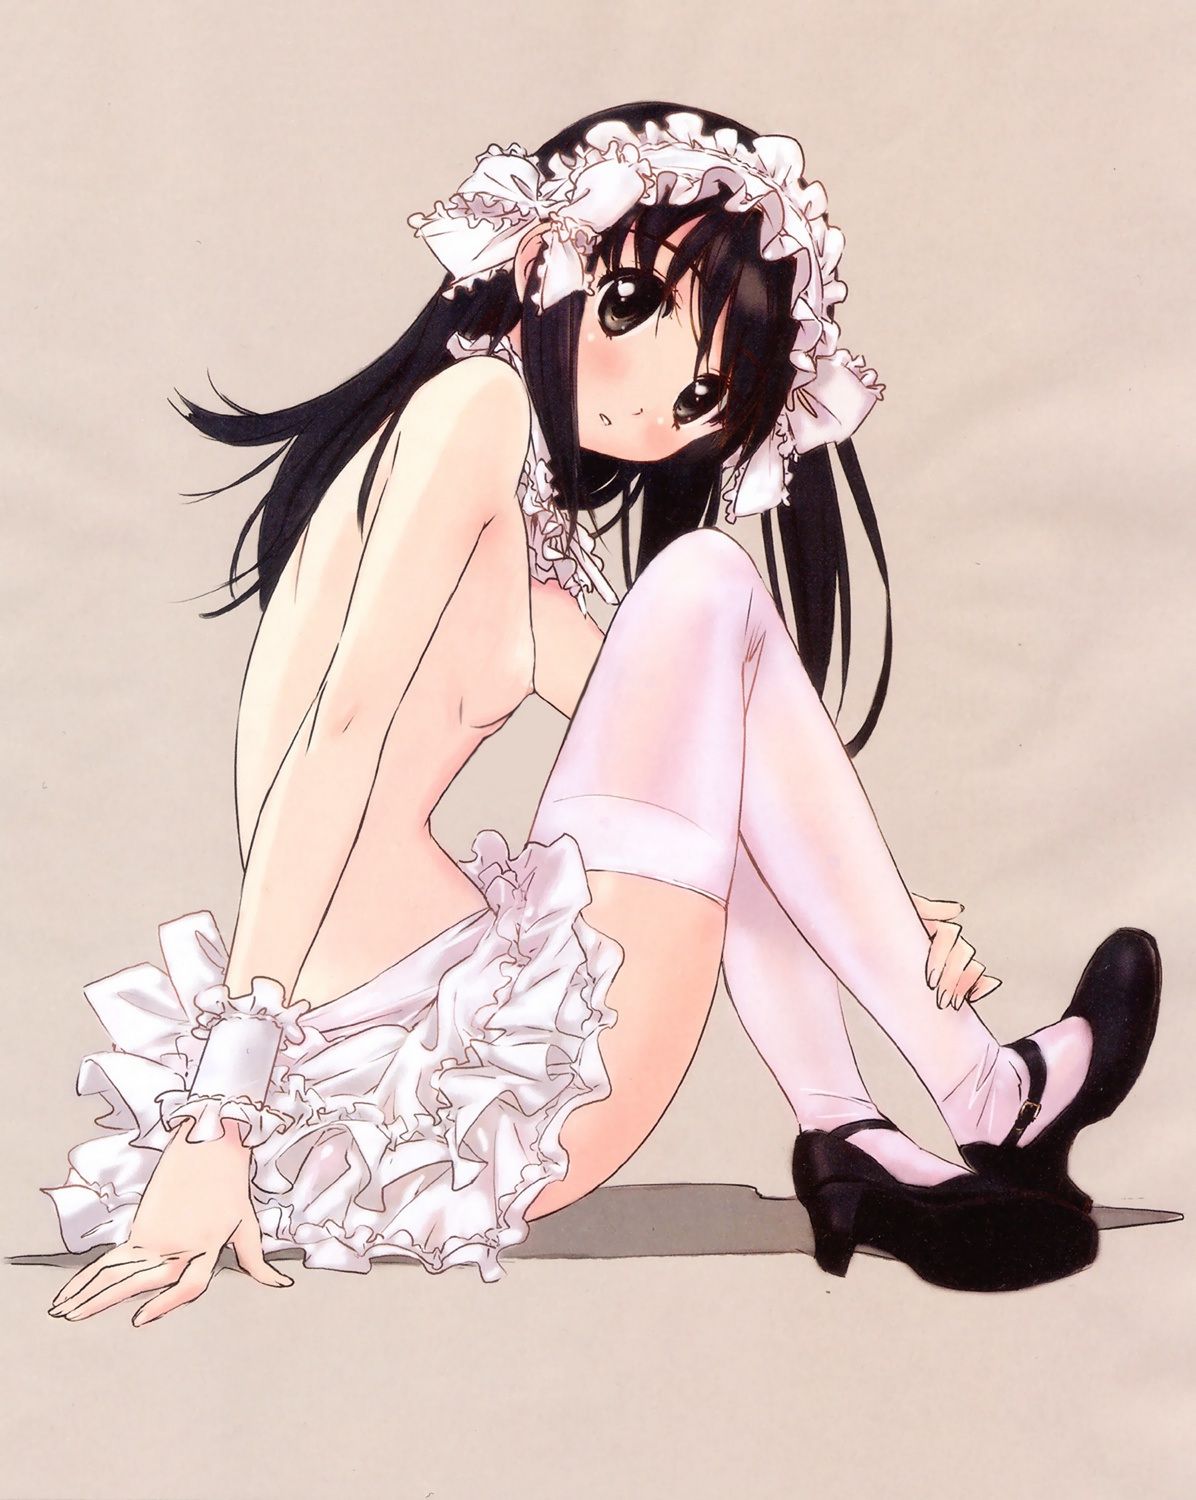 A cute two-dimensional erotic image of a poor milk loli girl for ladies and gentlemen who likes to be a little 10